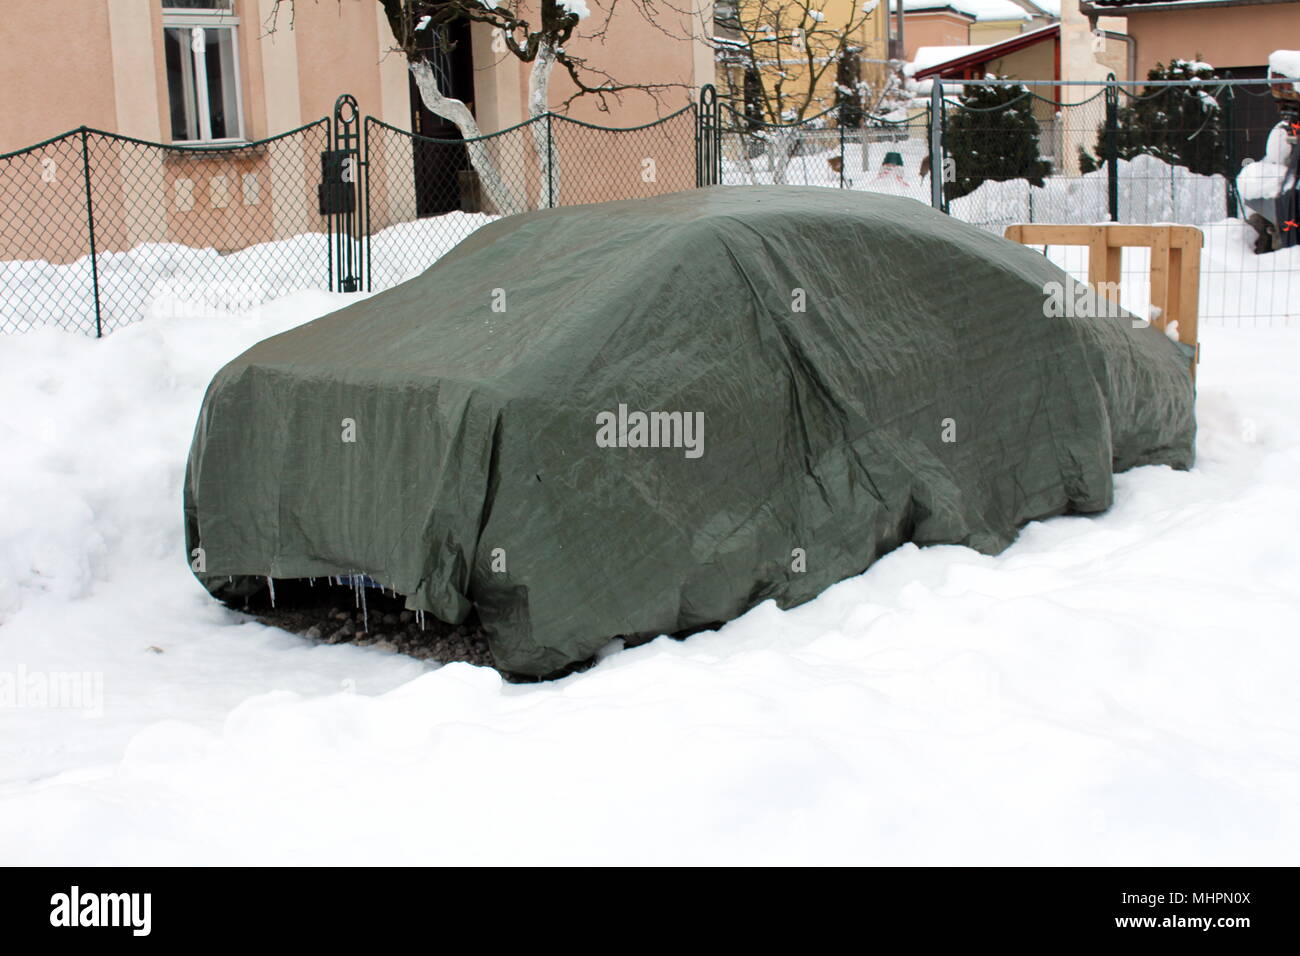 https://c8.alamy.com/comp/MHPN0X/family-car-parked-in-backyard-covered-with-nylon-waterproof-cover-protection-and-surrounded-with-deep-snow-on-cold-winter-day-MHPN0X.jpg